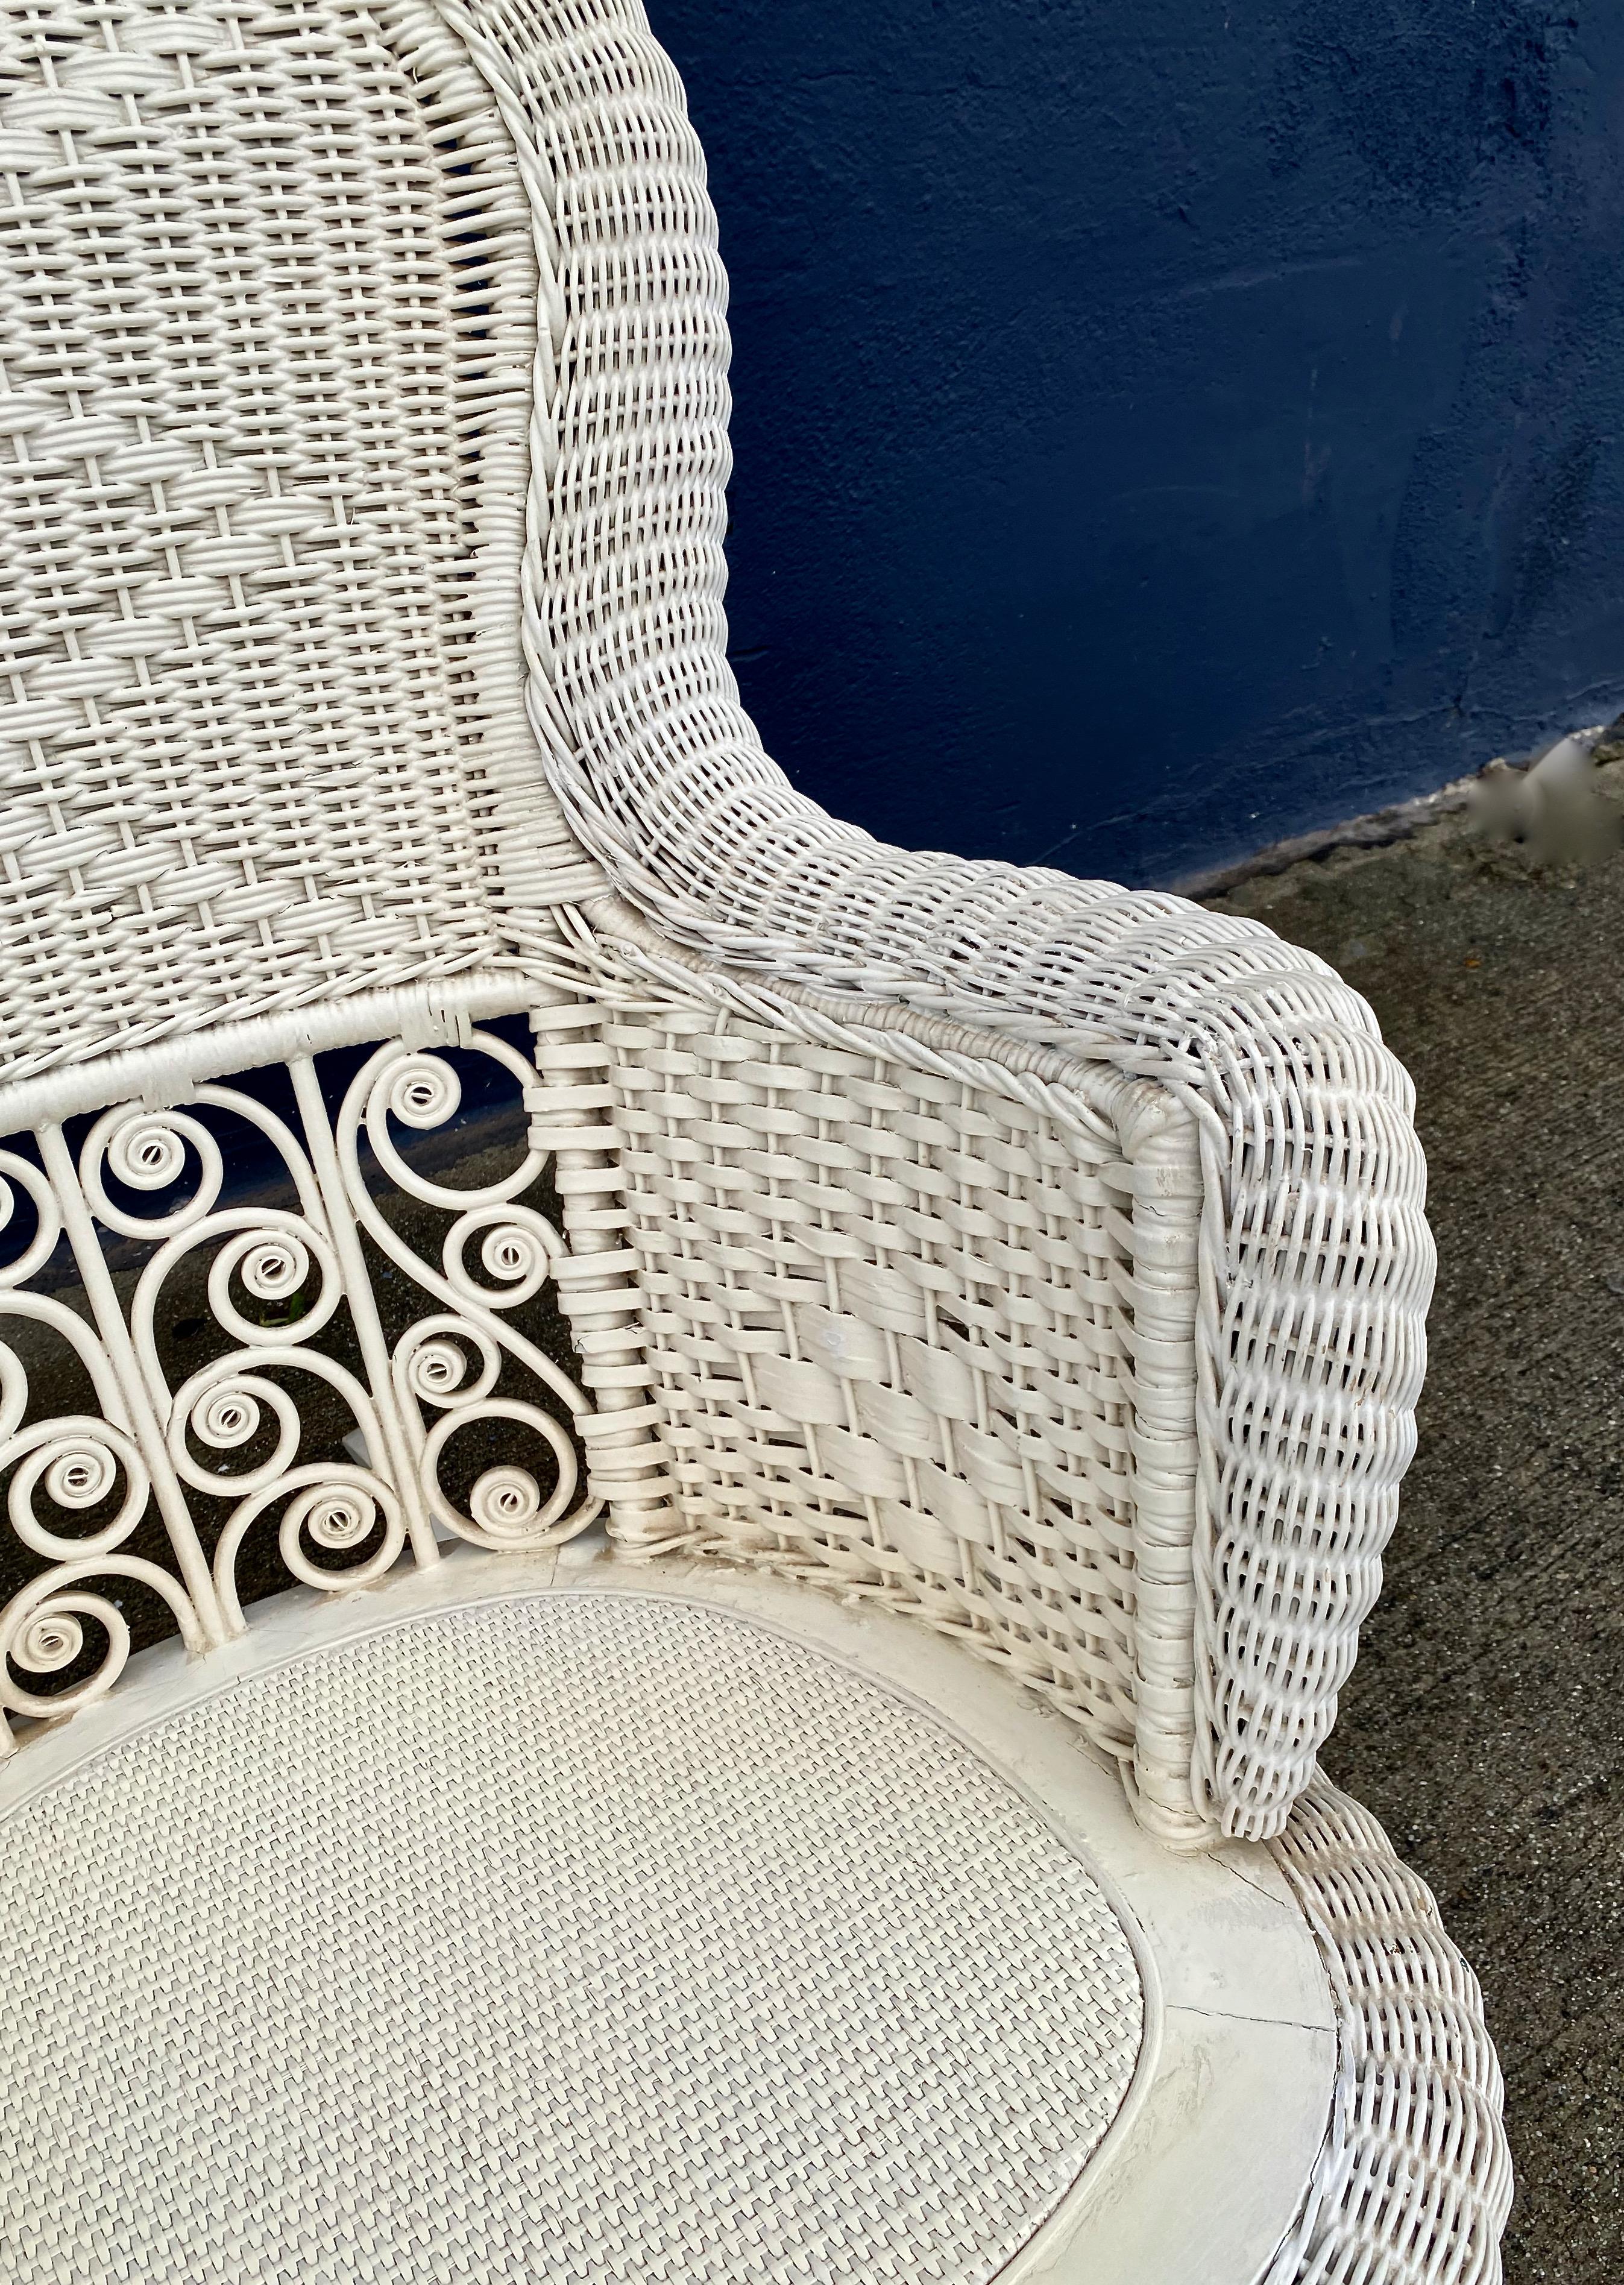 Hand-Woven Victorian Wicker Rocking Chair For Sale